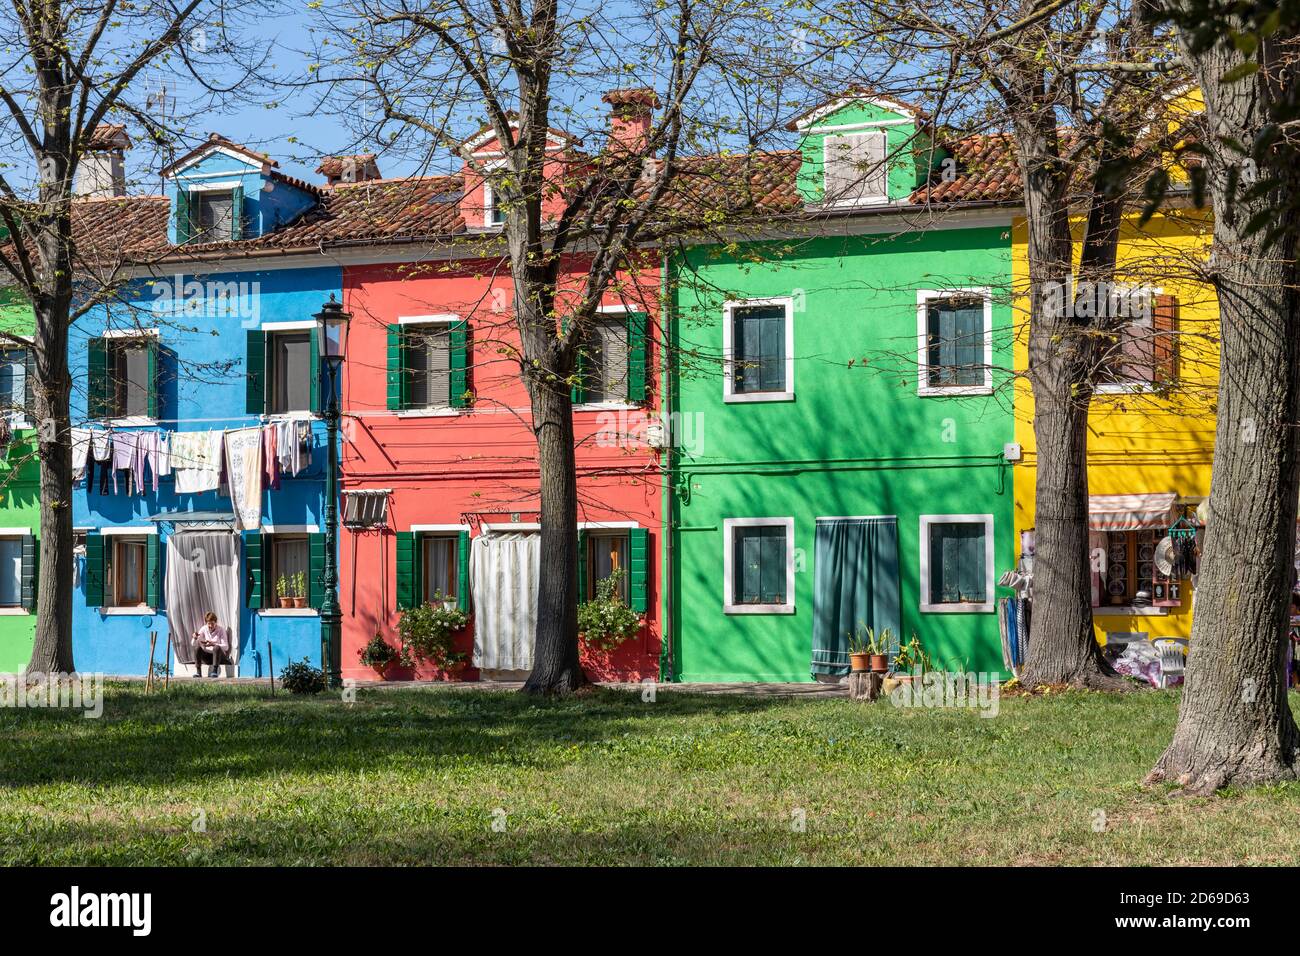 The Venetian Lagoon island of Burano and its traditional brightly coloured picturesque houses, Burano, Venice, Italy. 2020 Stock Photo